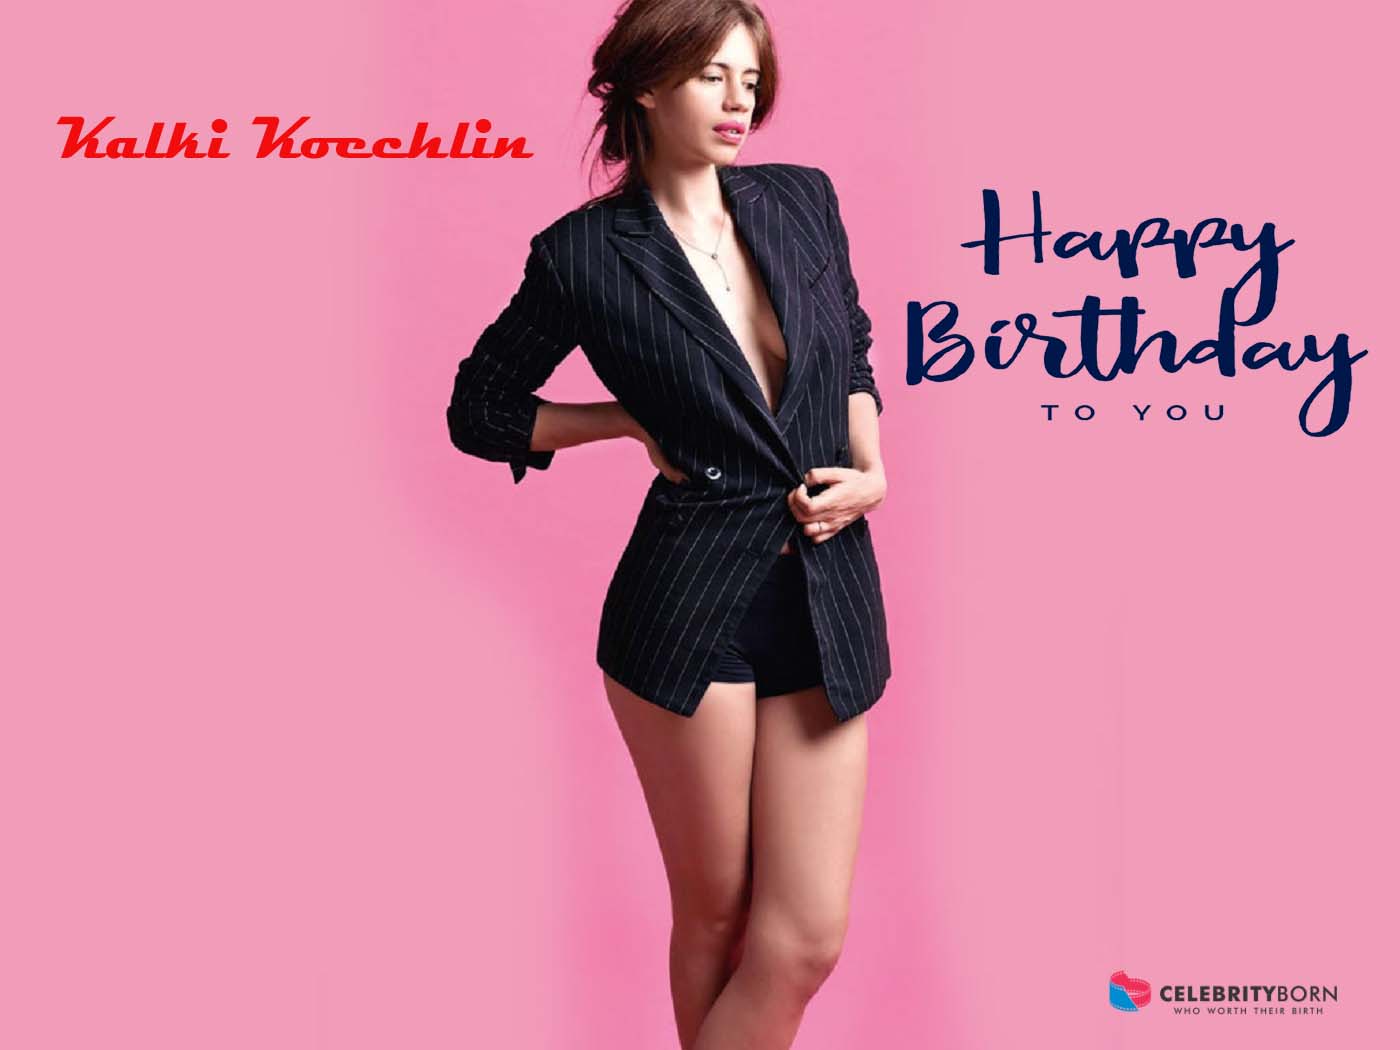 She fits in every outfit..
The Beautiful Happy Birthday Kalki Koechlin   